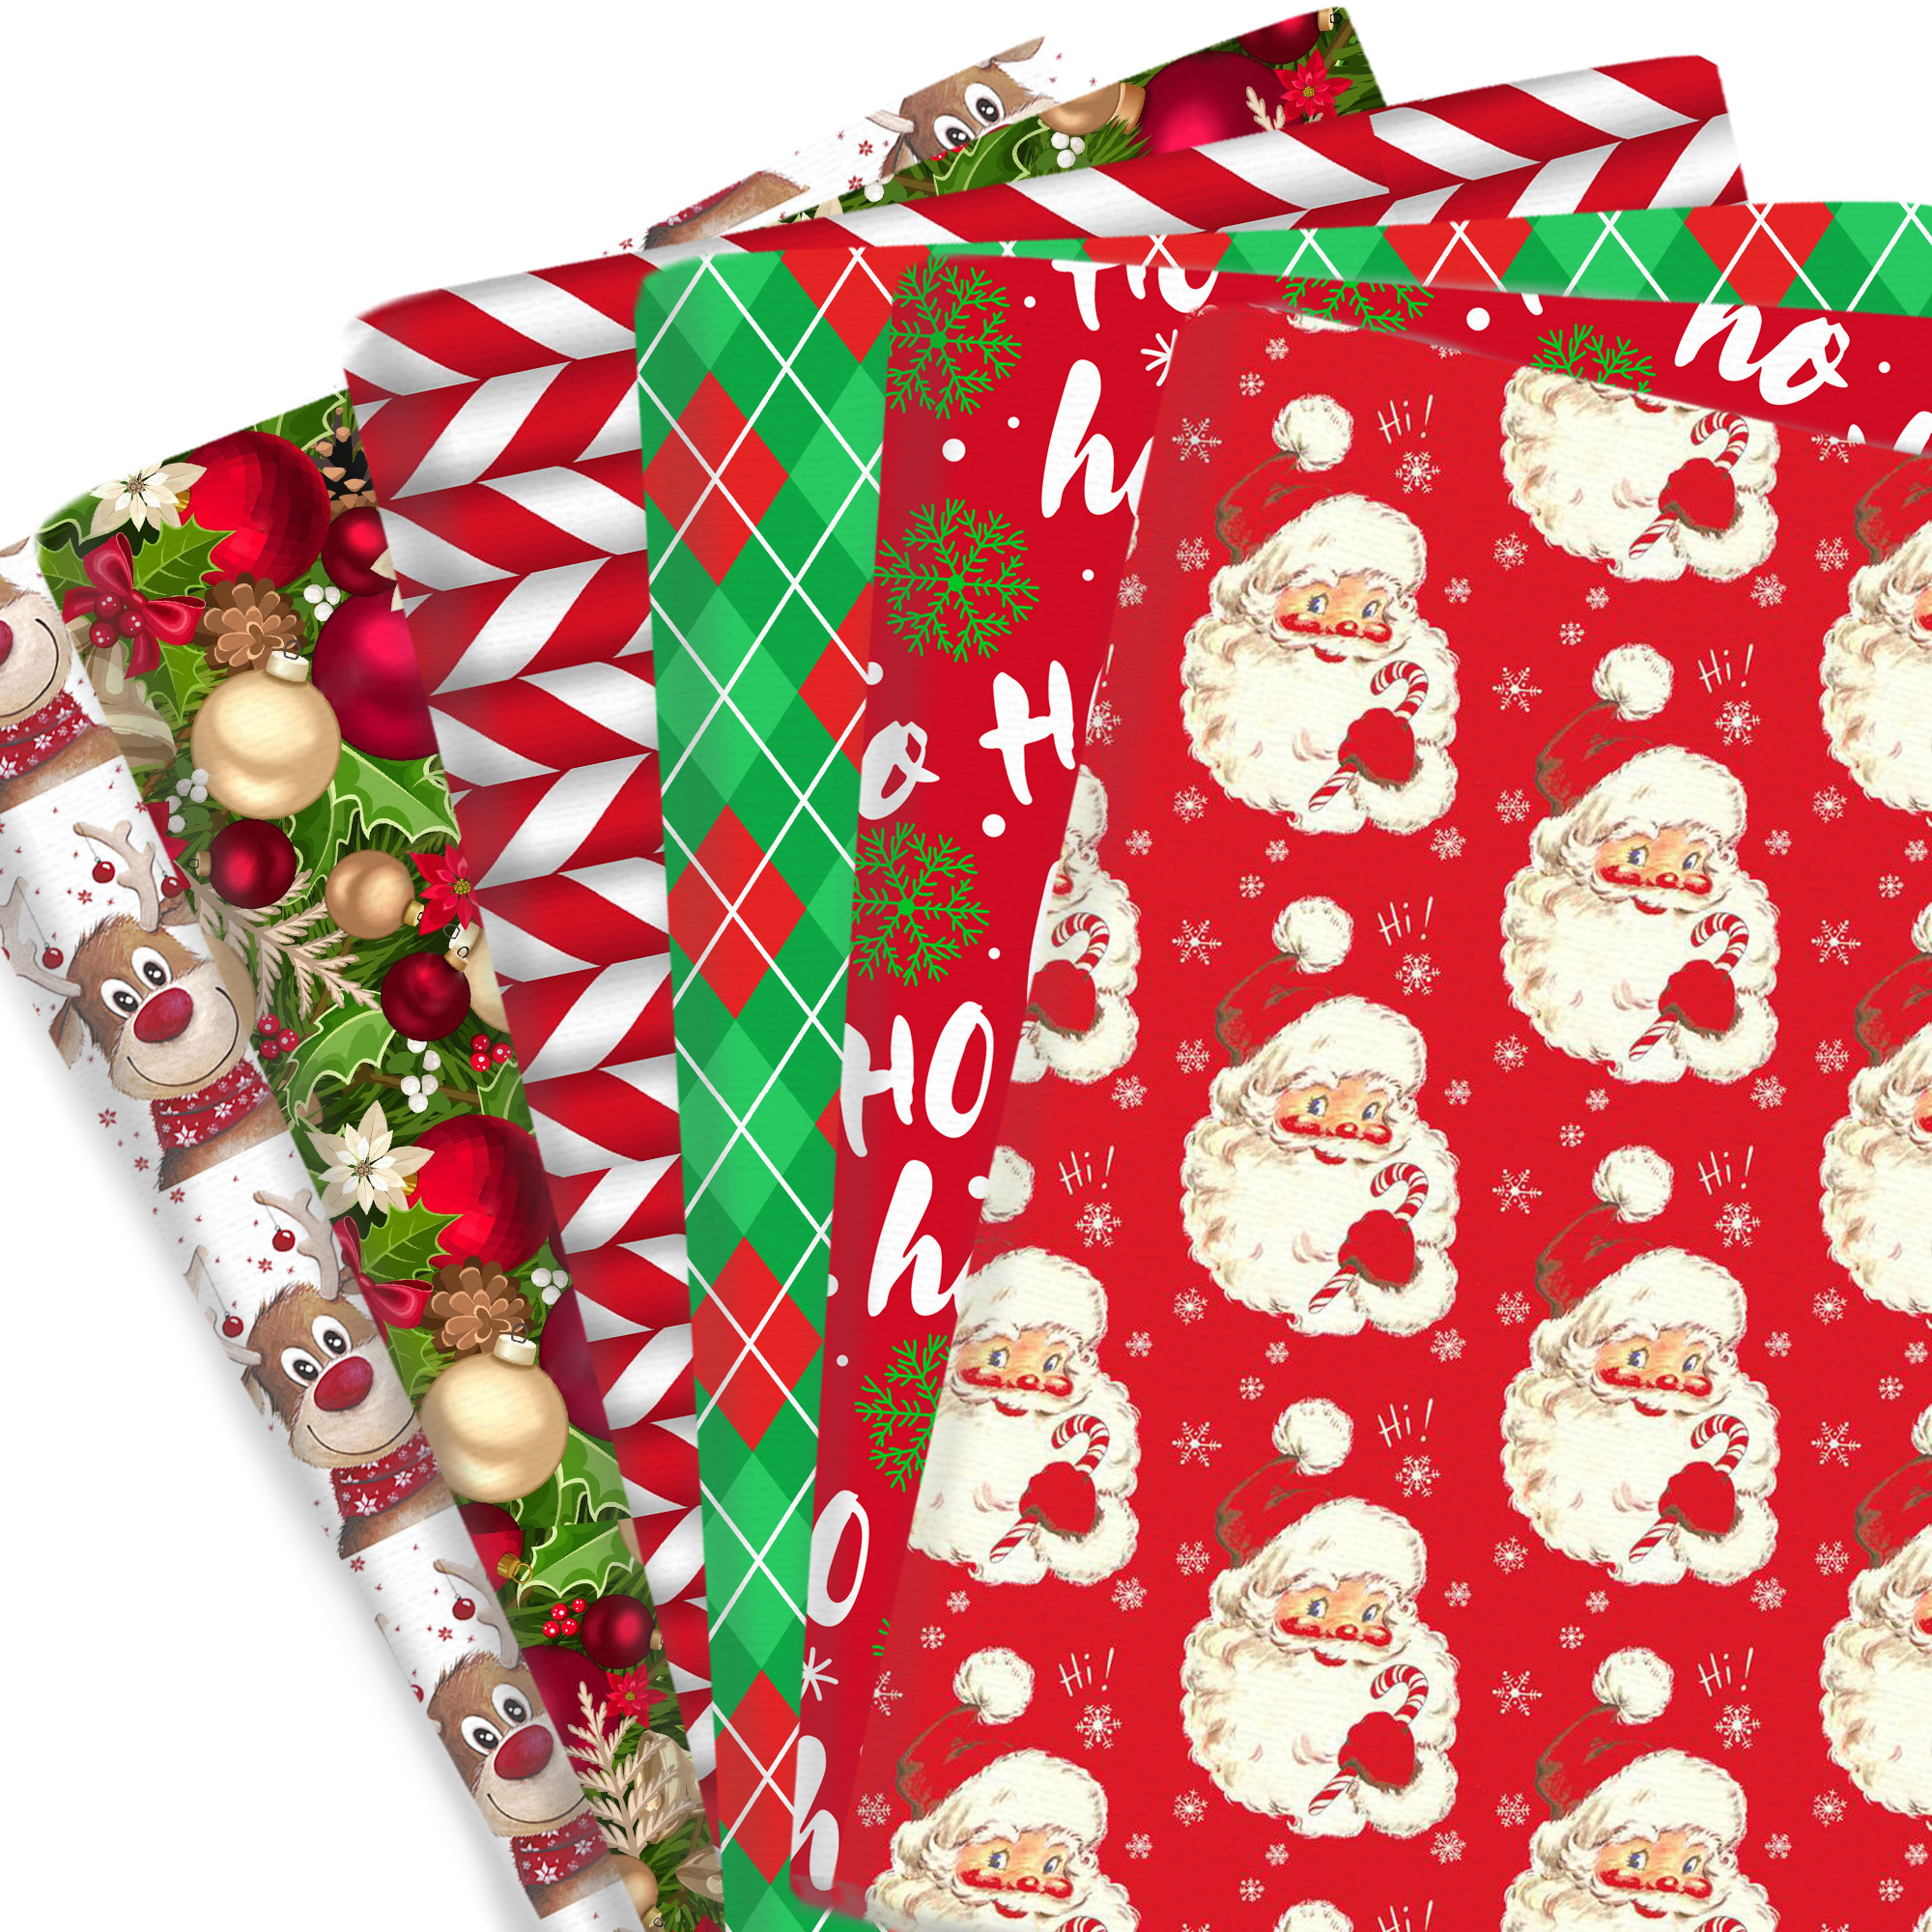 

Christmas Quilting Fabric Bundle - 1pc Holly, Santa & Reindeer Patterns, Pre-cut Polyester Cotton Blend For Diy Crafts, Doll Clothes & Patchwork, 57x19.68 Inches